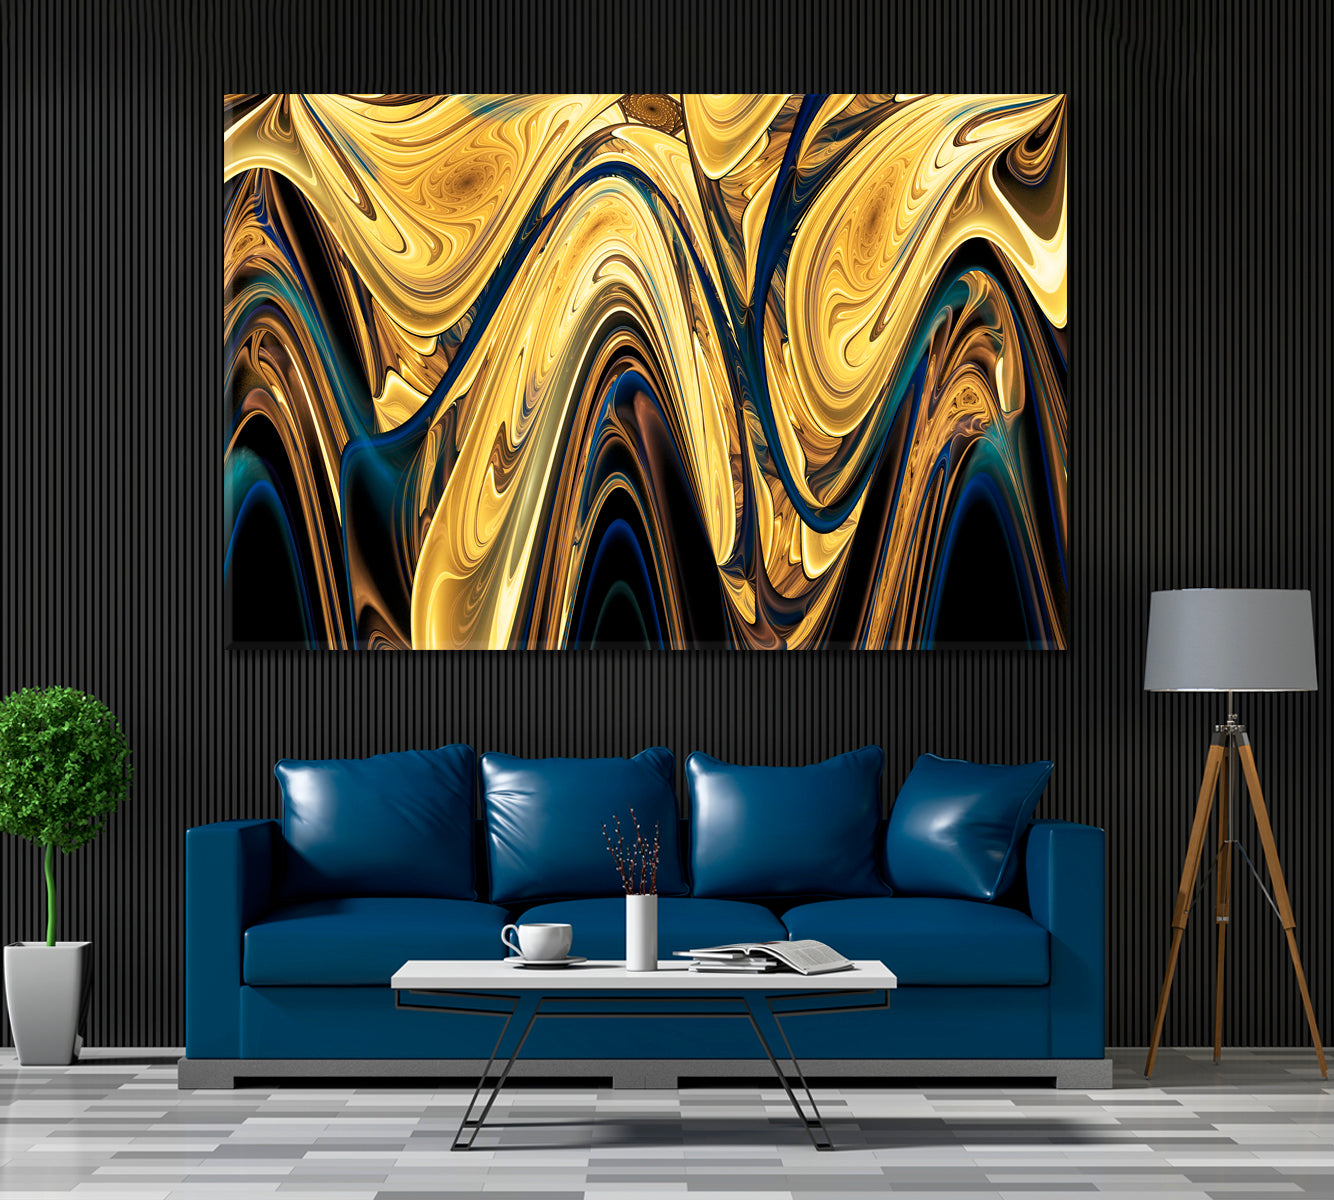 Abstract Swirl Gold Pattern Canvas Print ArtLexy 1 Panel 24"x16" inches 